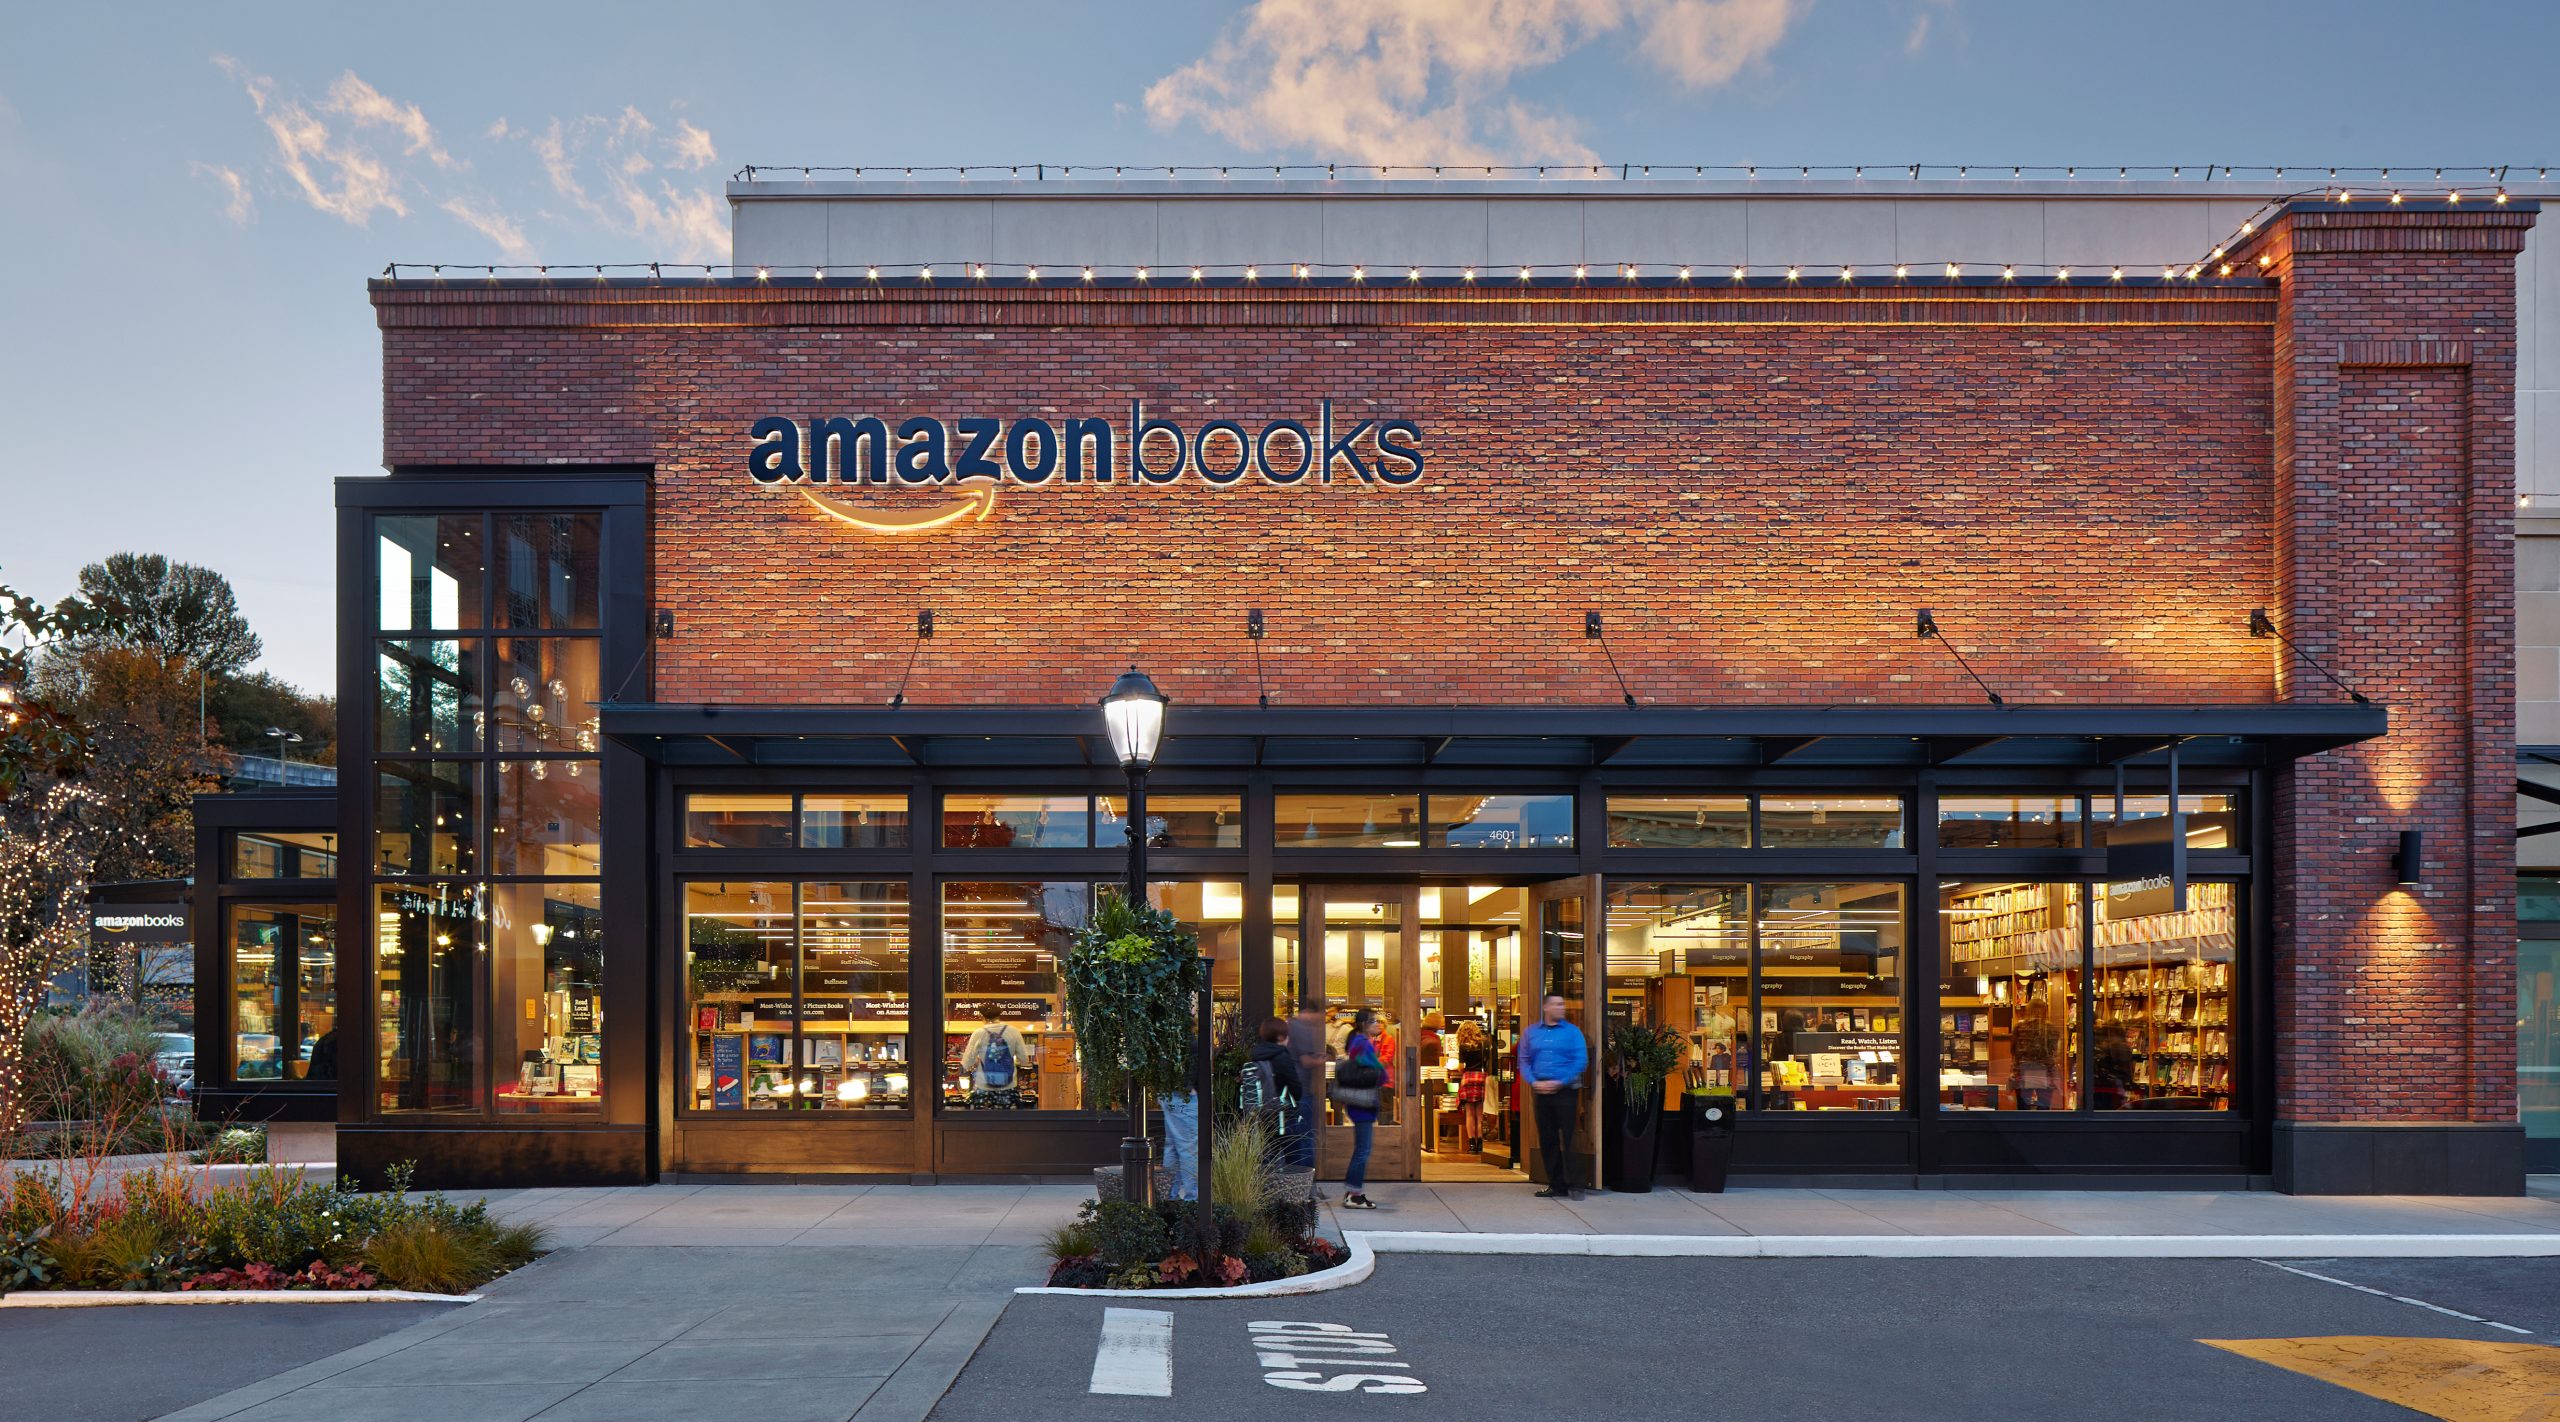 France Creates Legislation to Protect Its Book Industry from Amazon